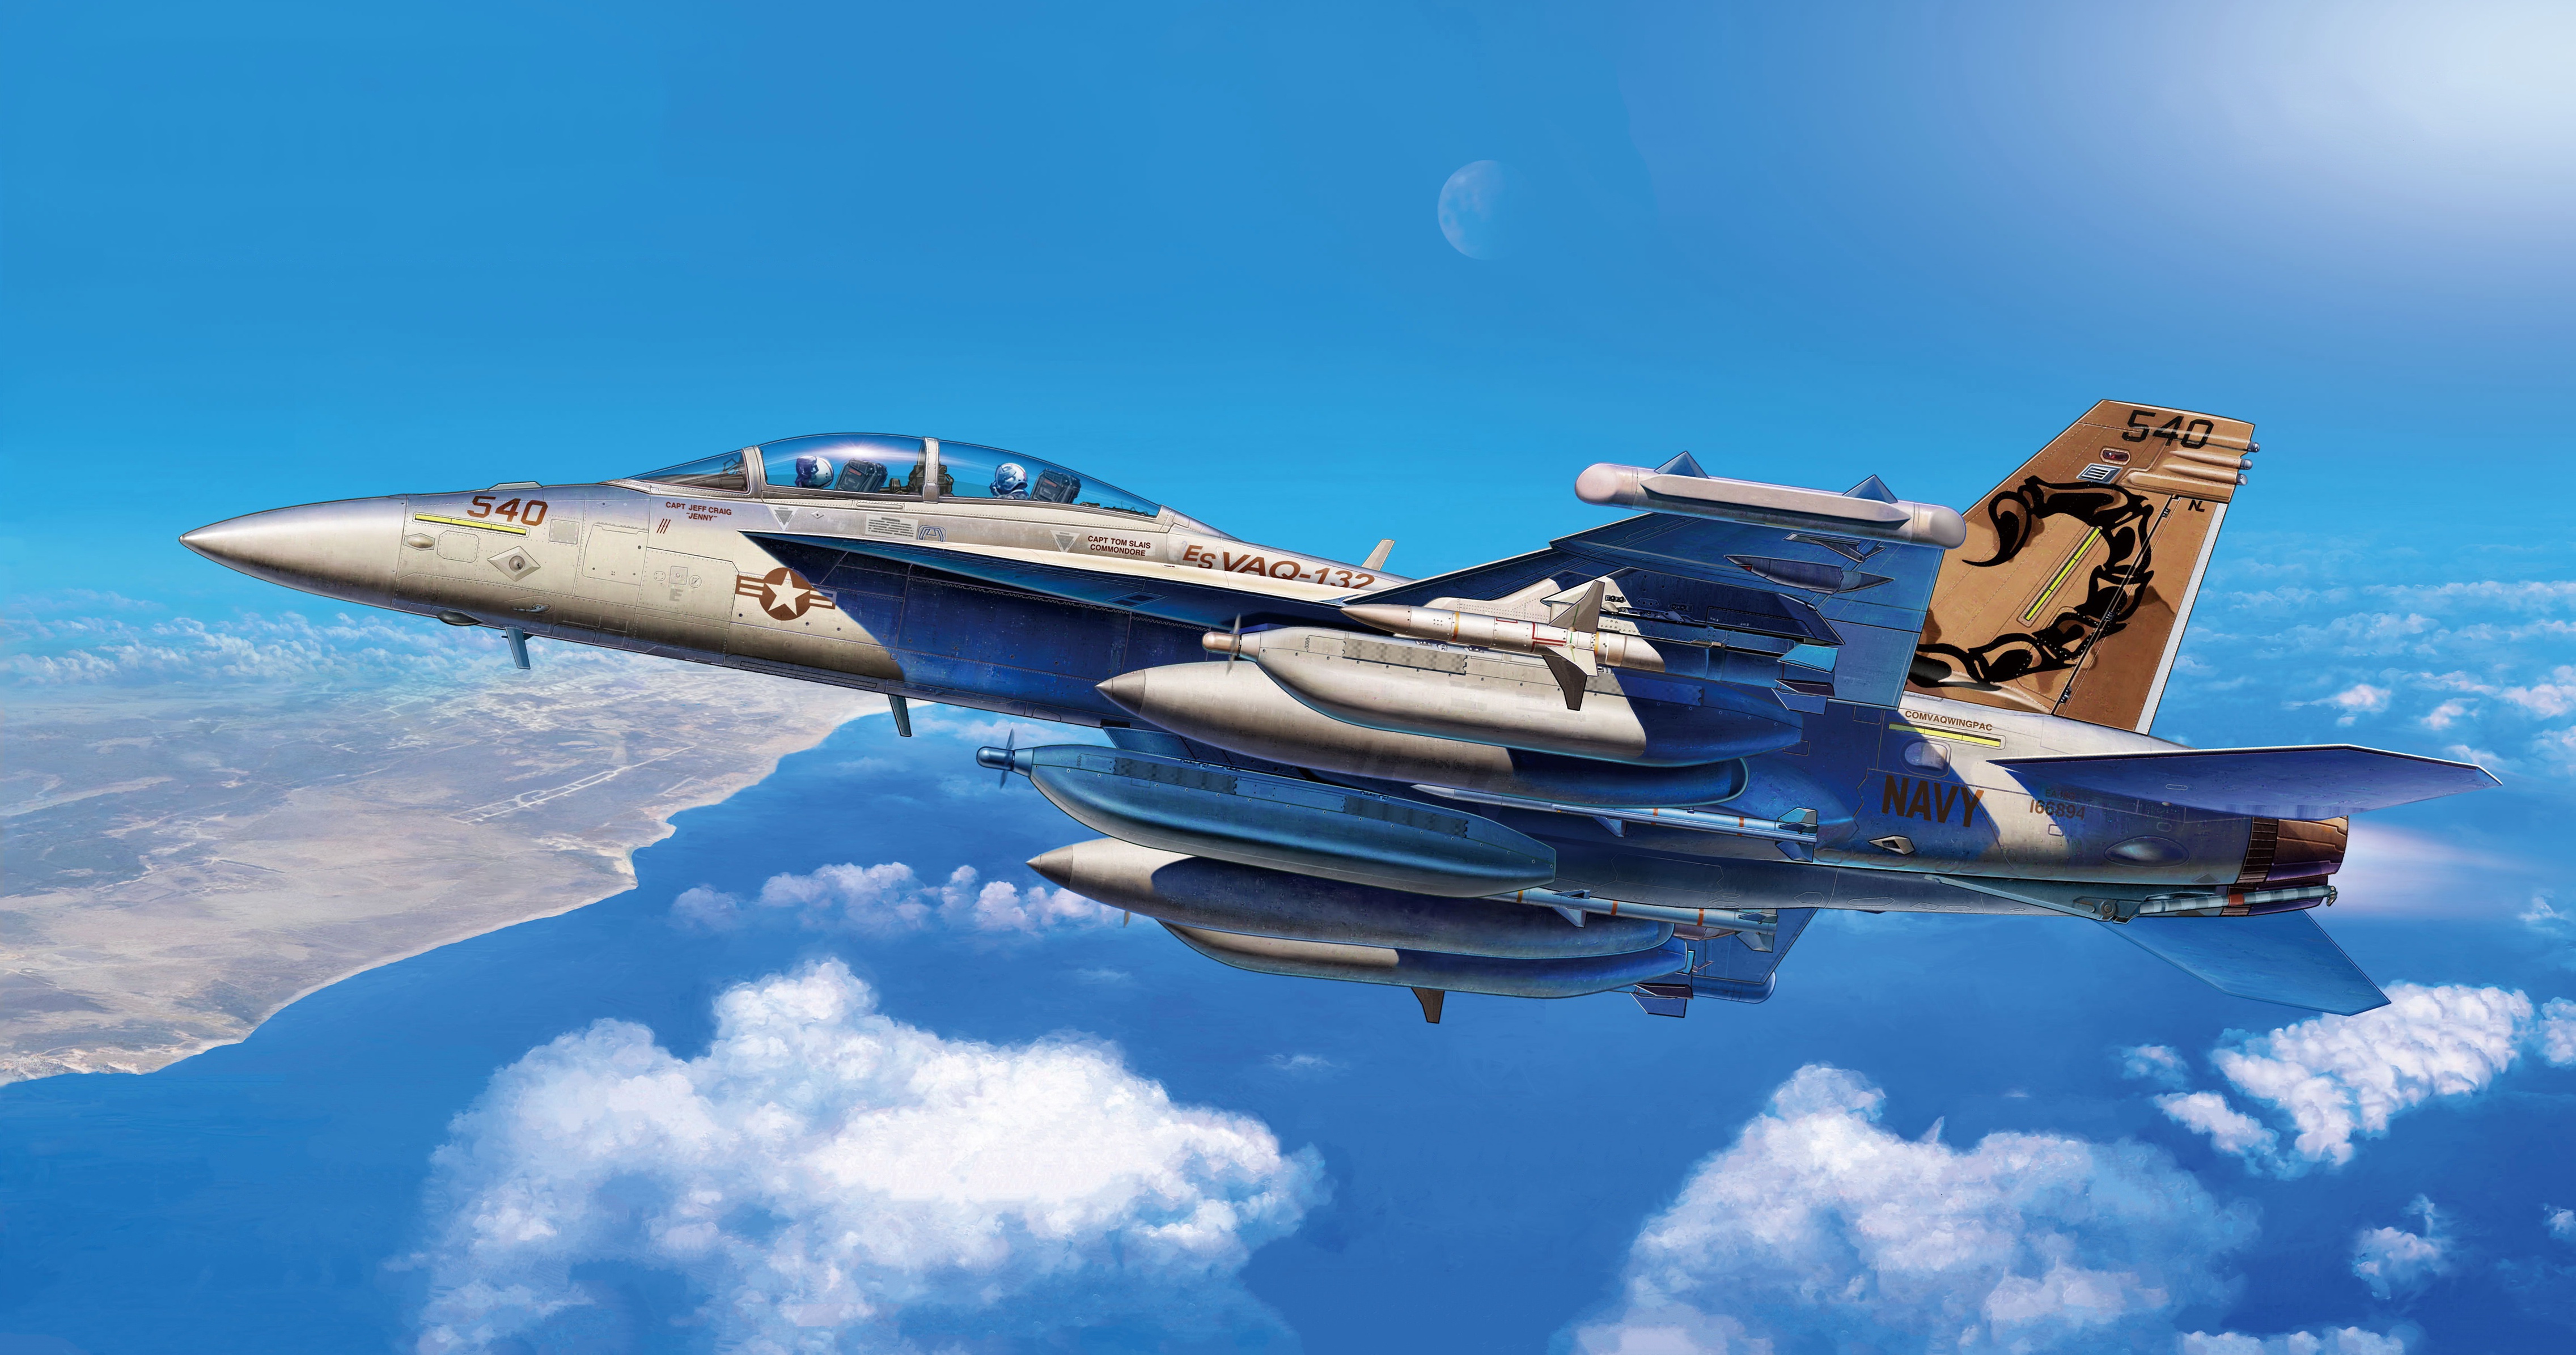 Wallpaper ID 295340  aircraft jet fighter air force sky clouds sunset 4k  wallpaper free download